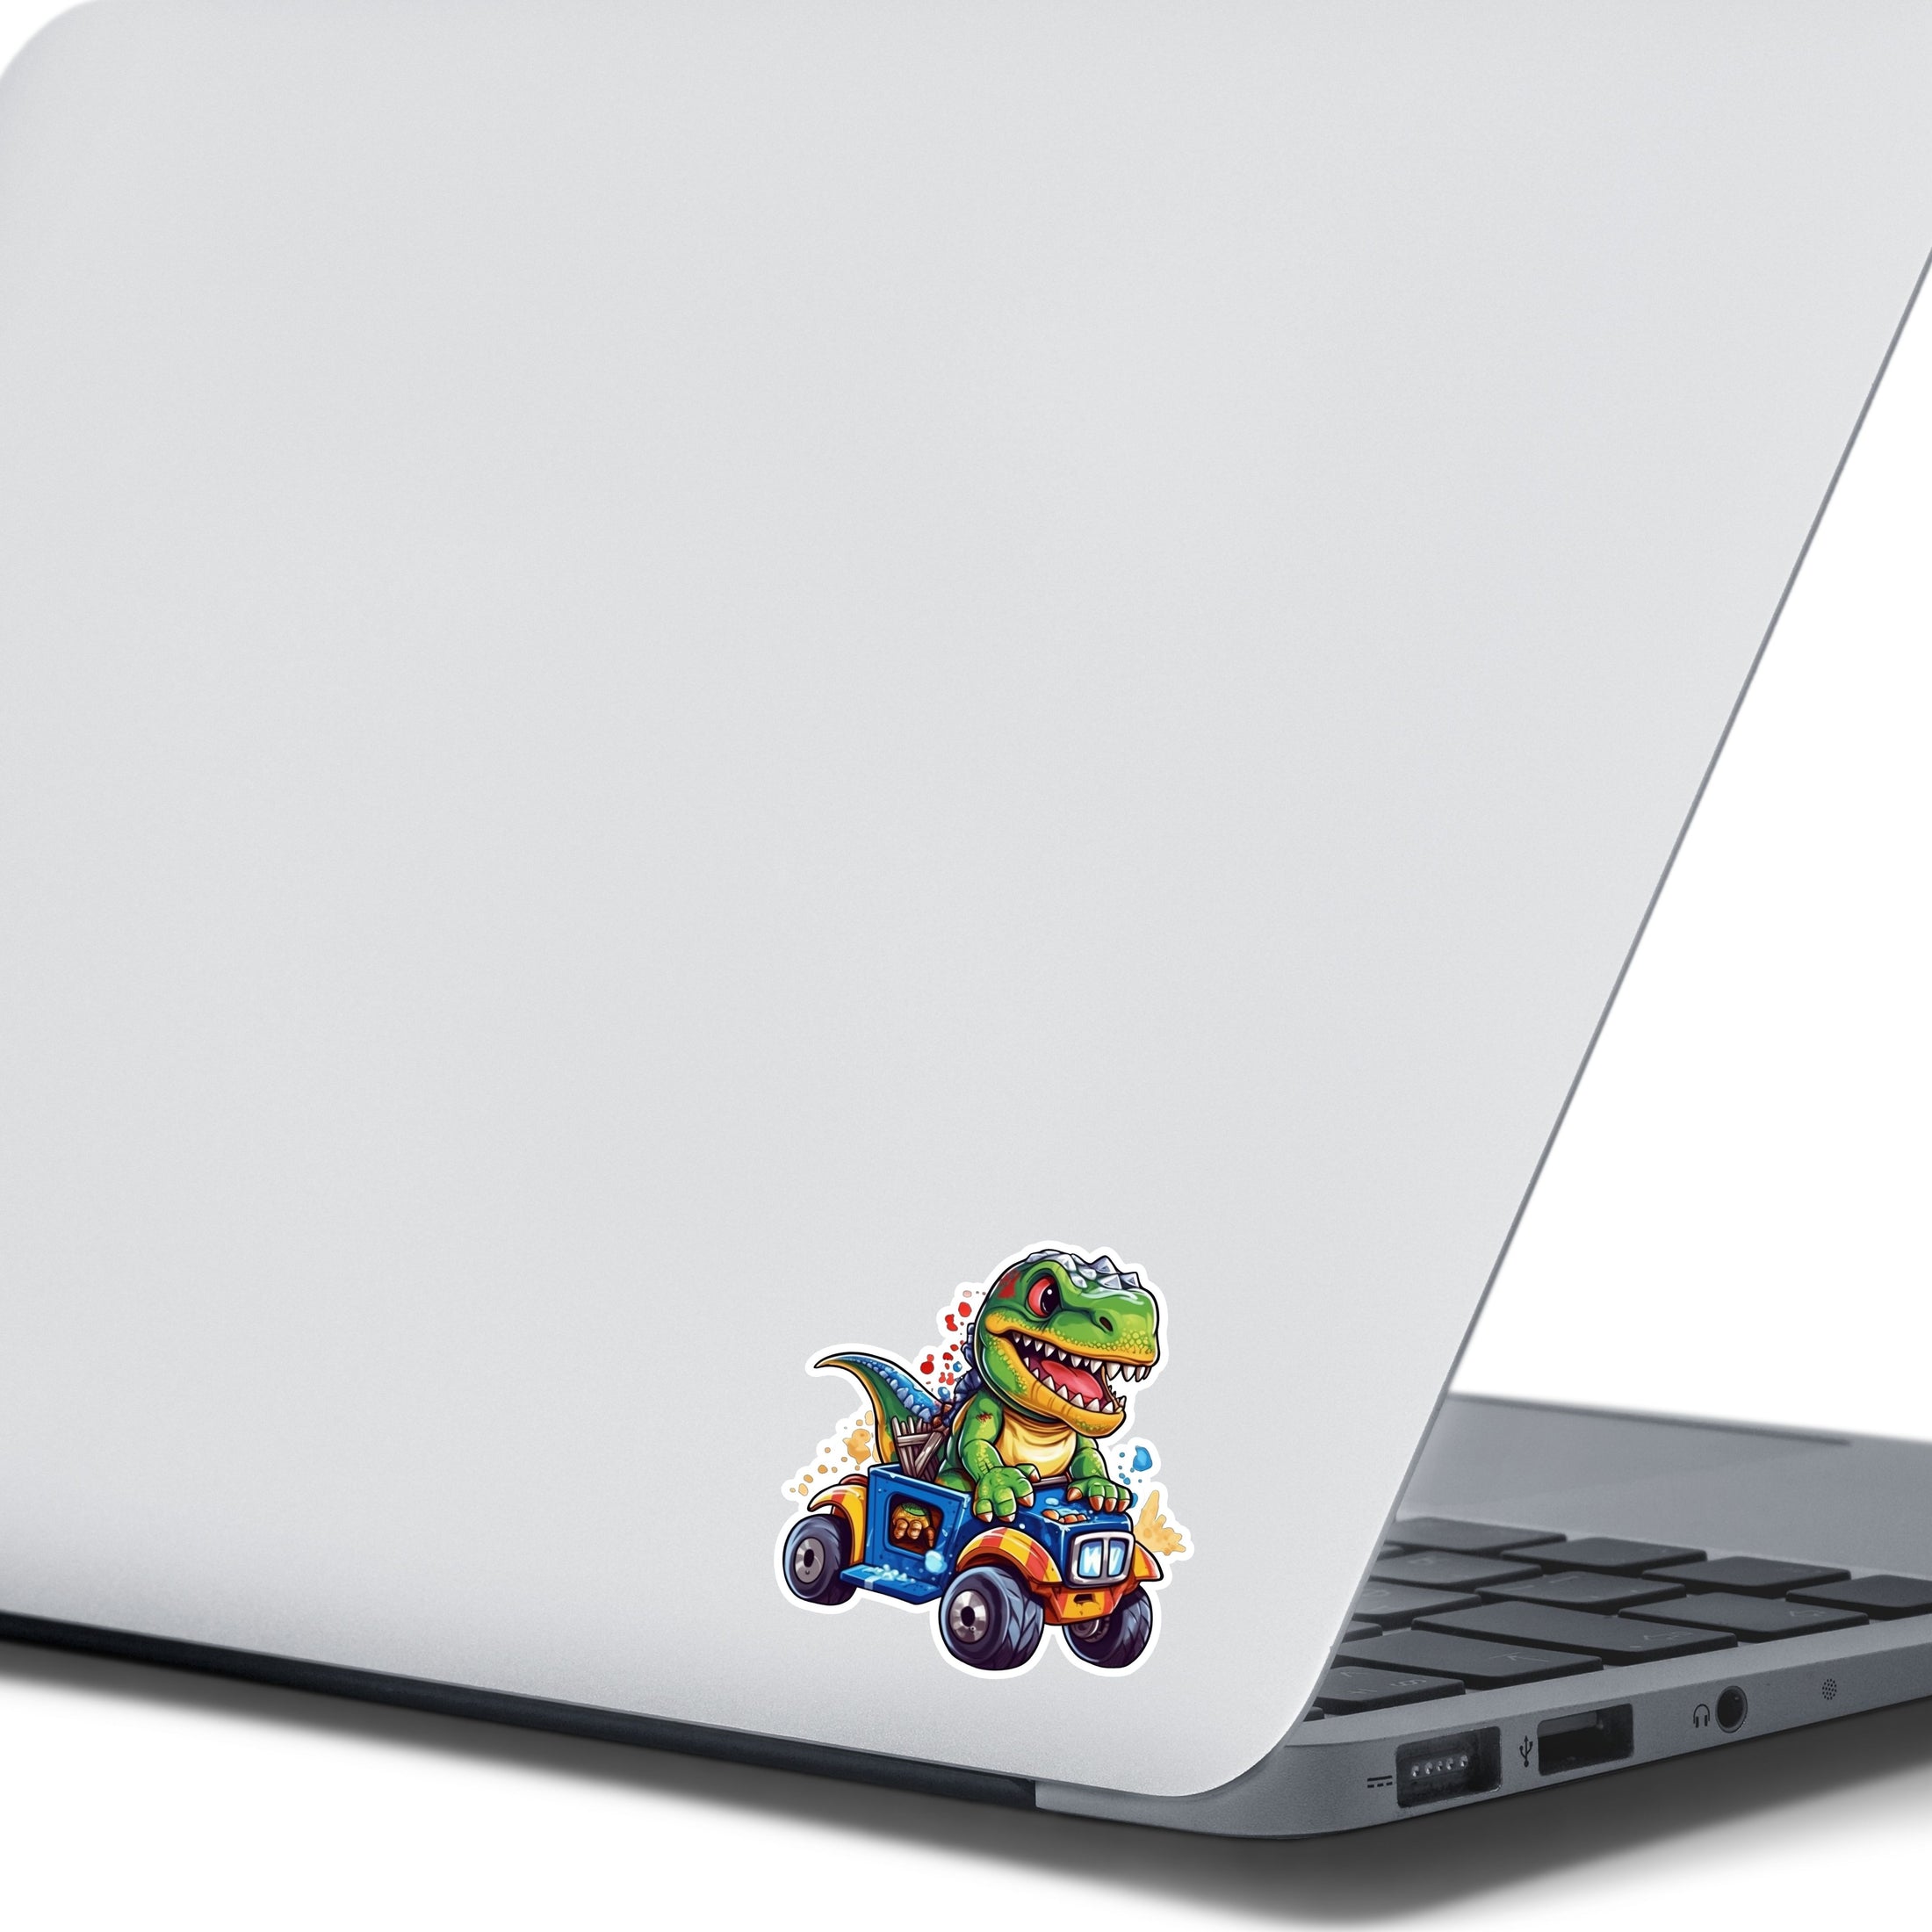 This image shows the dino on ATV sticker on the back of an open laptop.